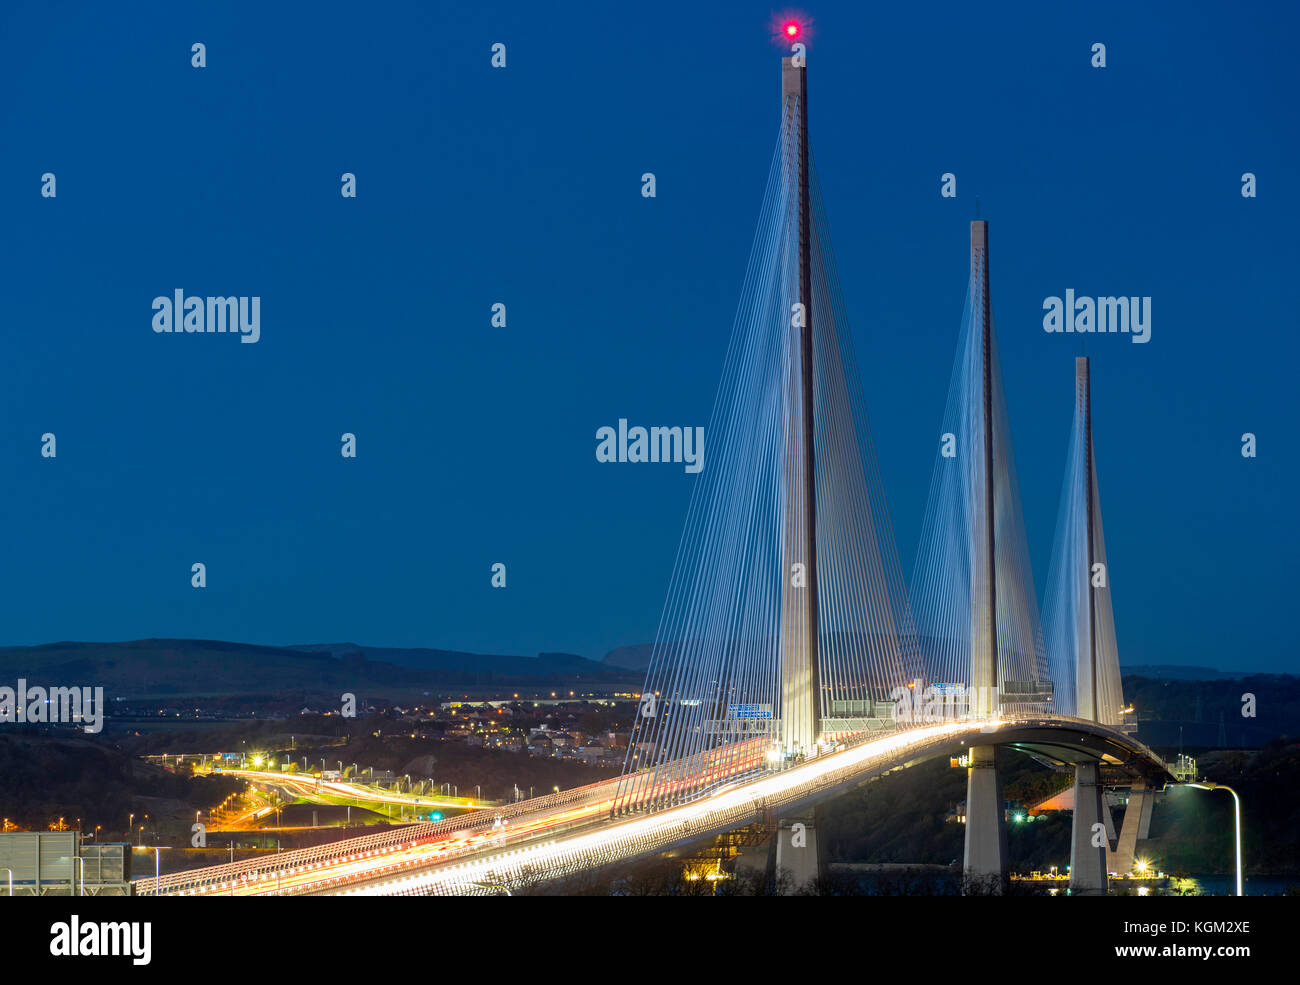 View of new Queensferry Crossing bridge at night spanning the Firth of Forth between West Lothian and Fife in Scotland, United Kingdom. Stock Photo